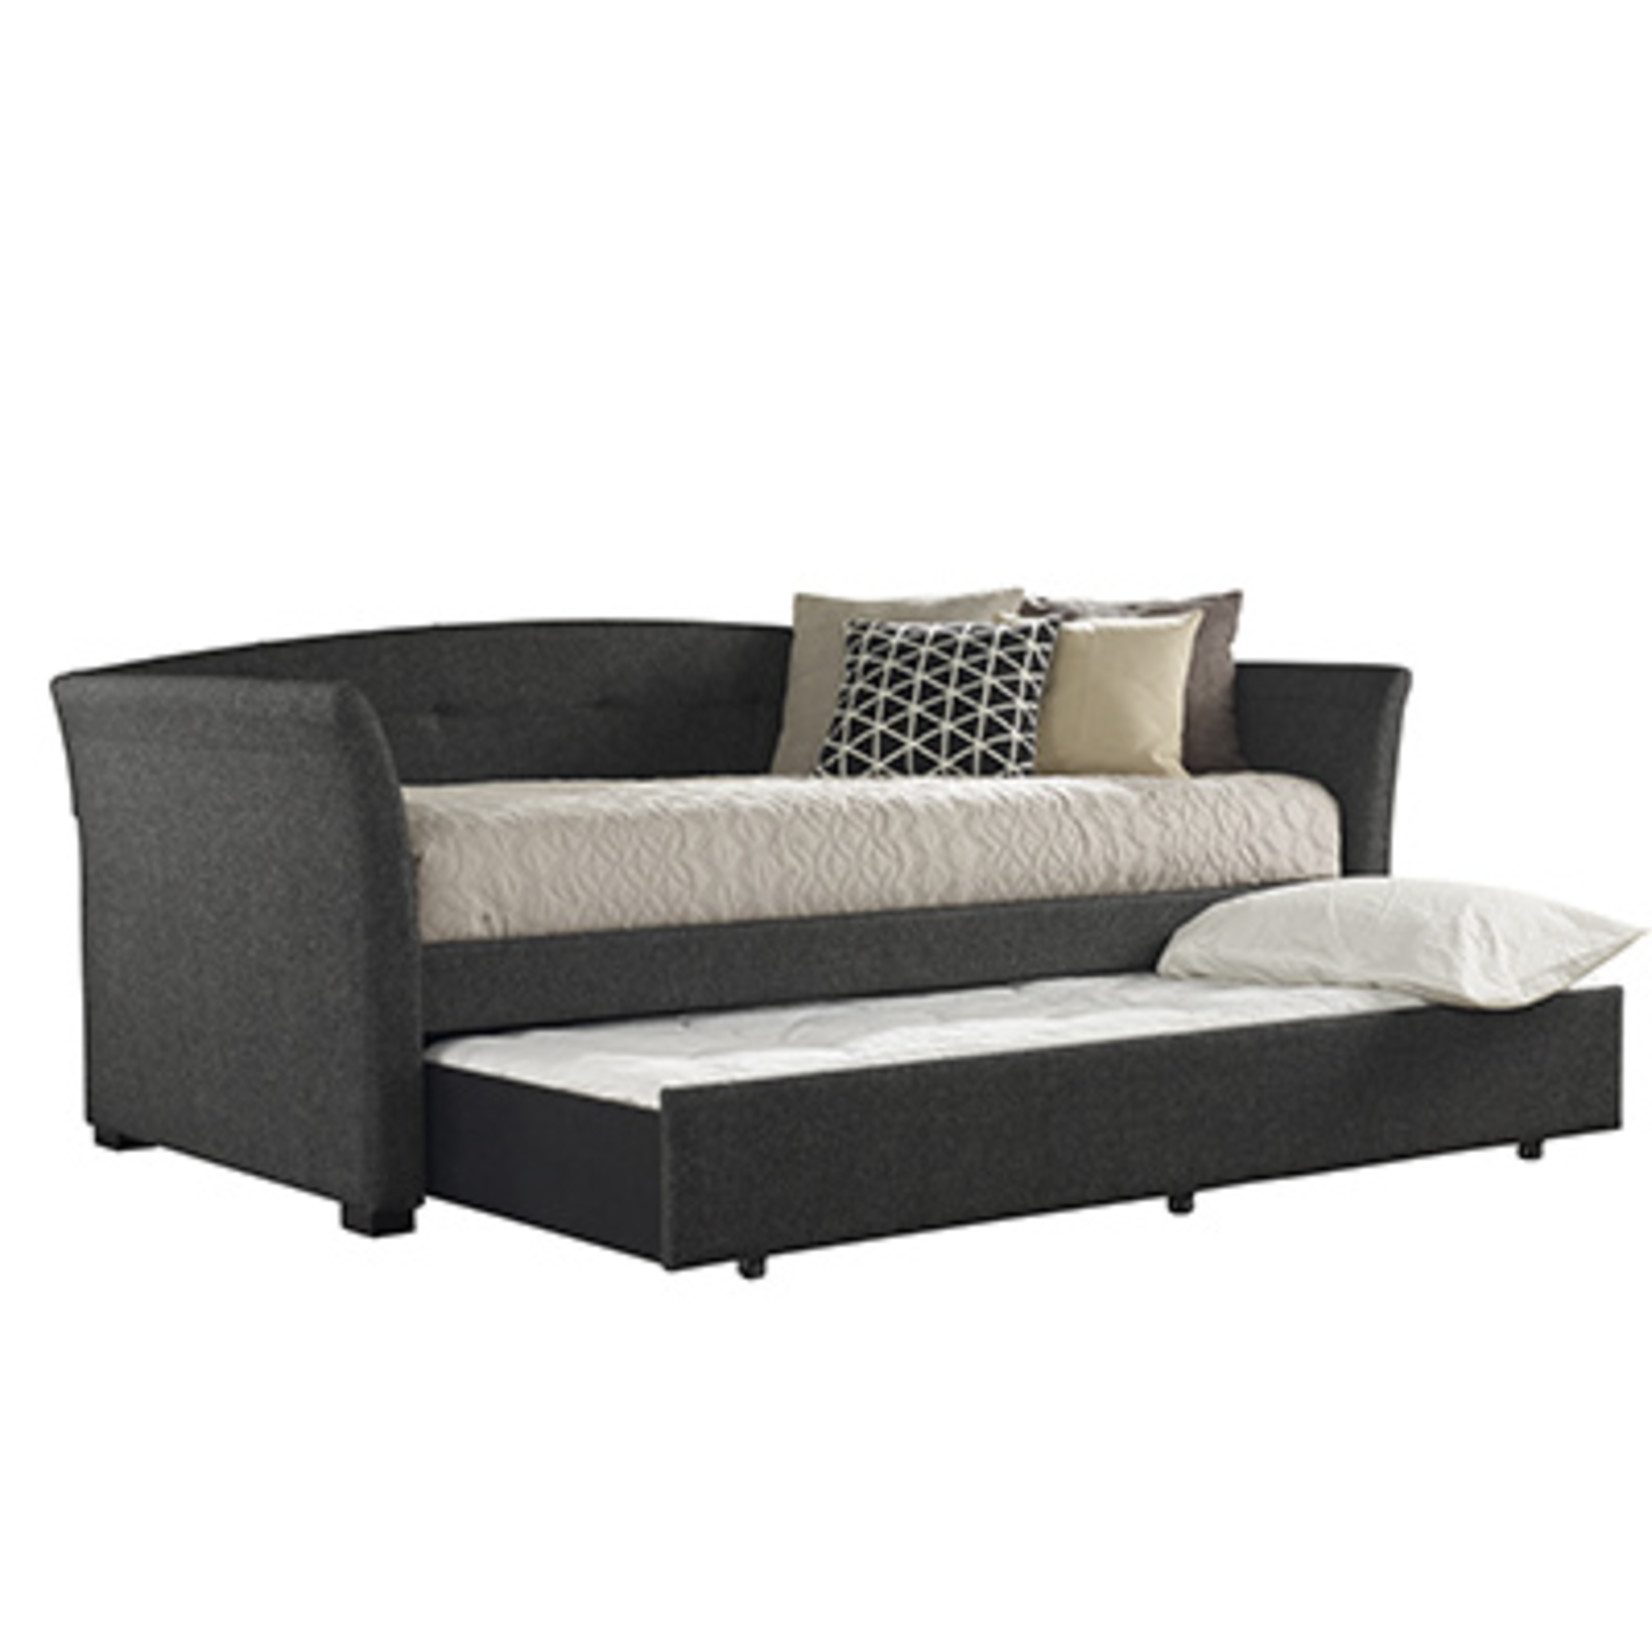 Hillsdale MORGAN DAYBED WITH TRUNDLE, ONYX LINEN